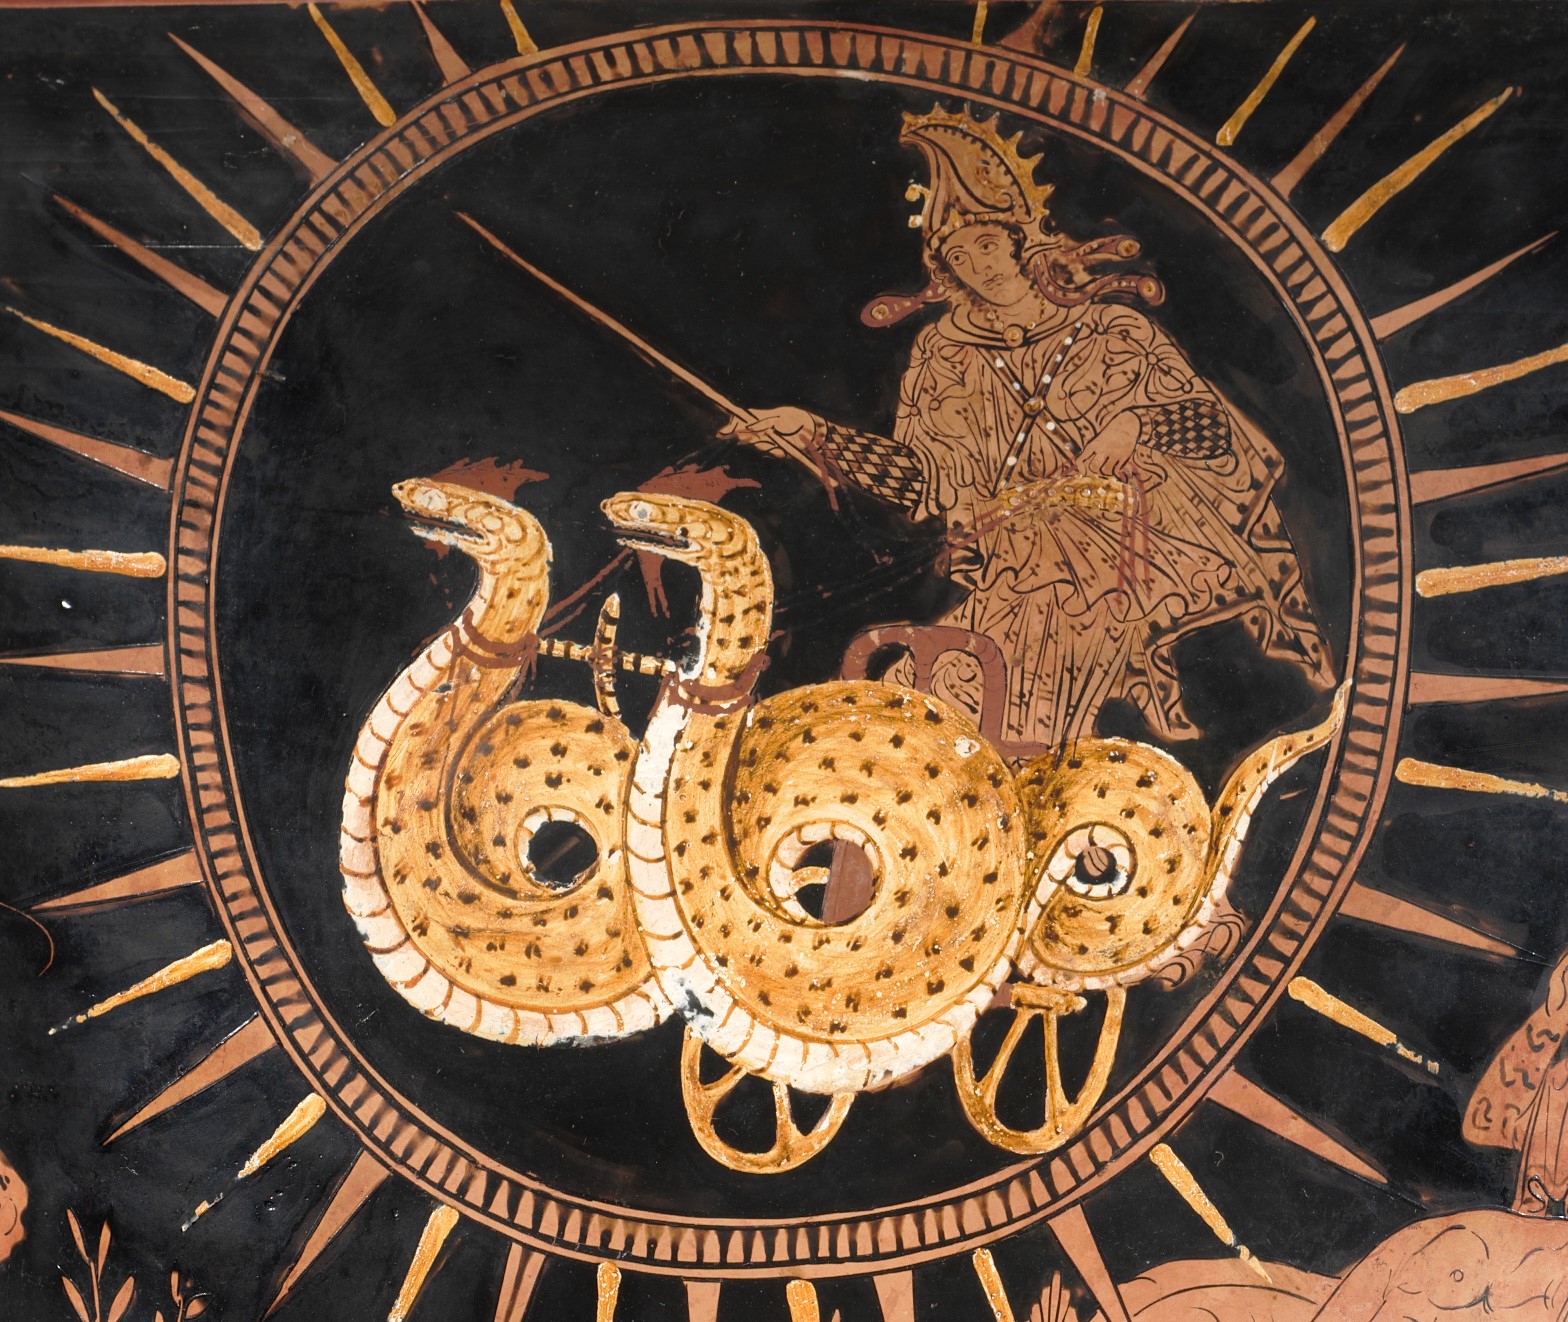 Inside a frame of sun rays, Medea rides in a chariot drawn by two serpentine dragons.